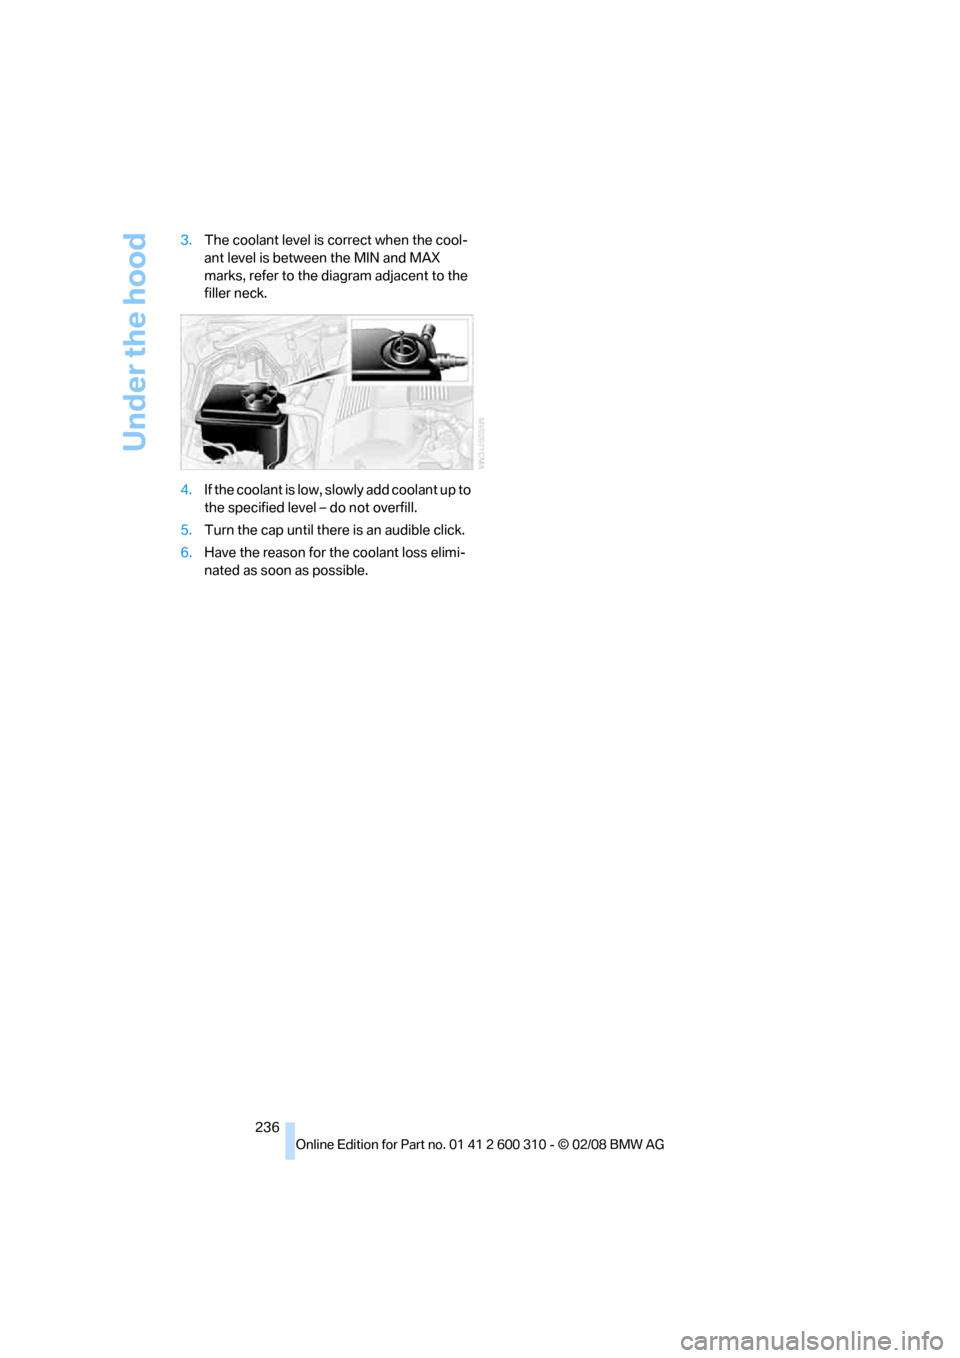 BMW 525XI TOURING 2008 E61 Owners Manual Under the hood
236 3.The coolant level is correct when the cool-
ant level is between the MIN and MAX 
marks, refer to the diagram adjacent to the 
filler neck.
4.If the coolant is low, slowly add coo